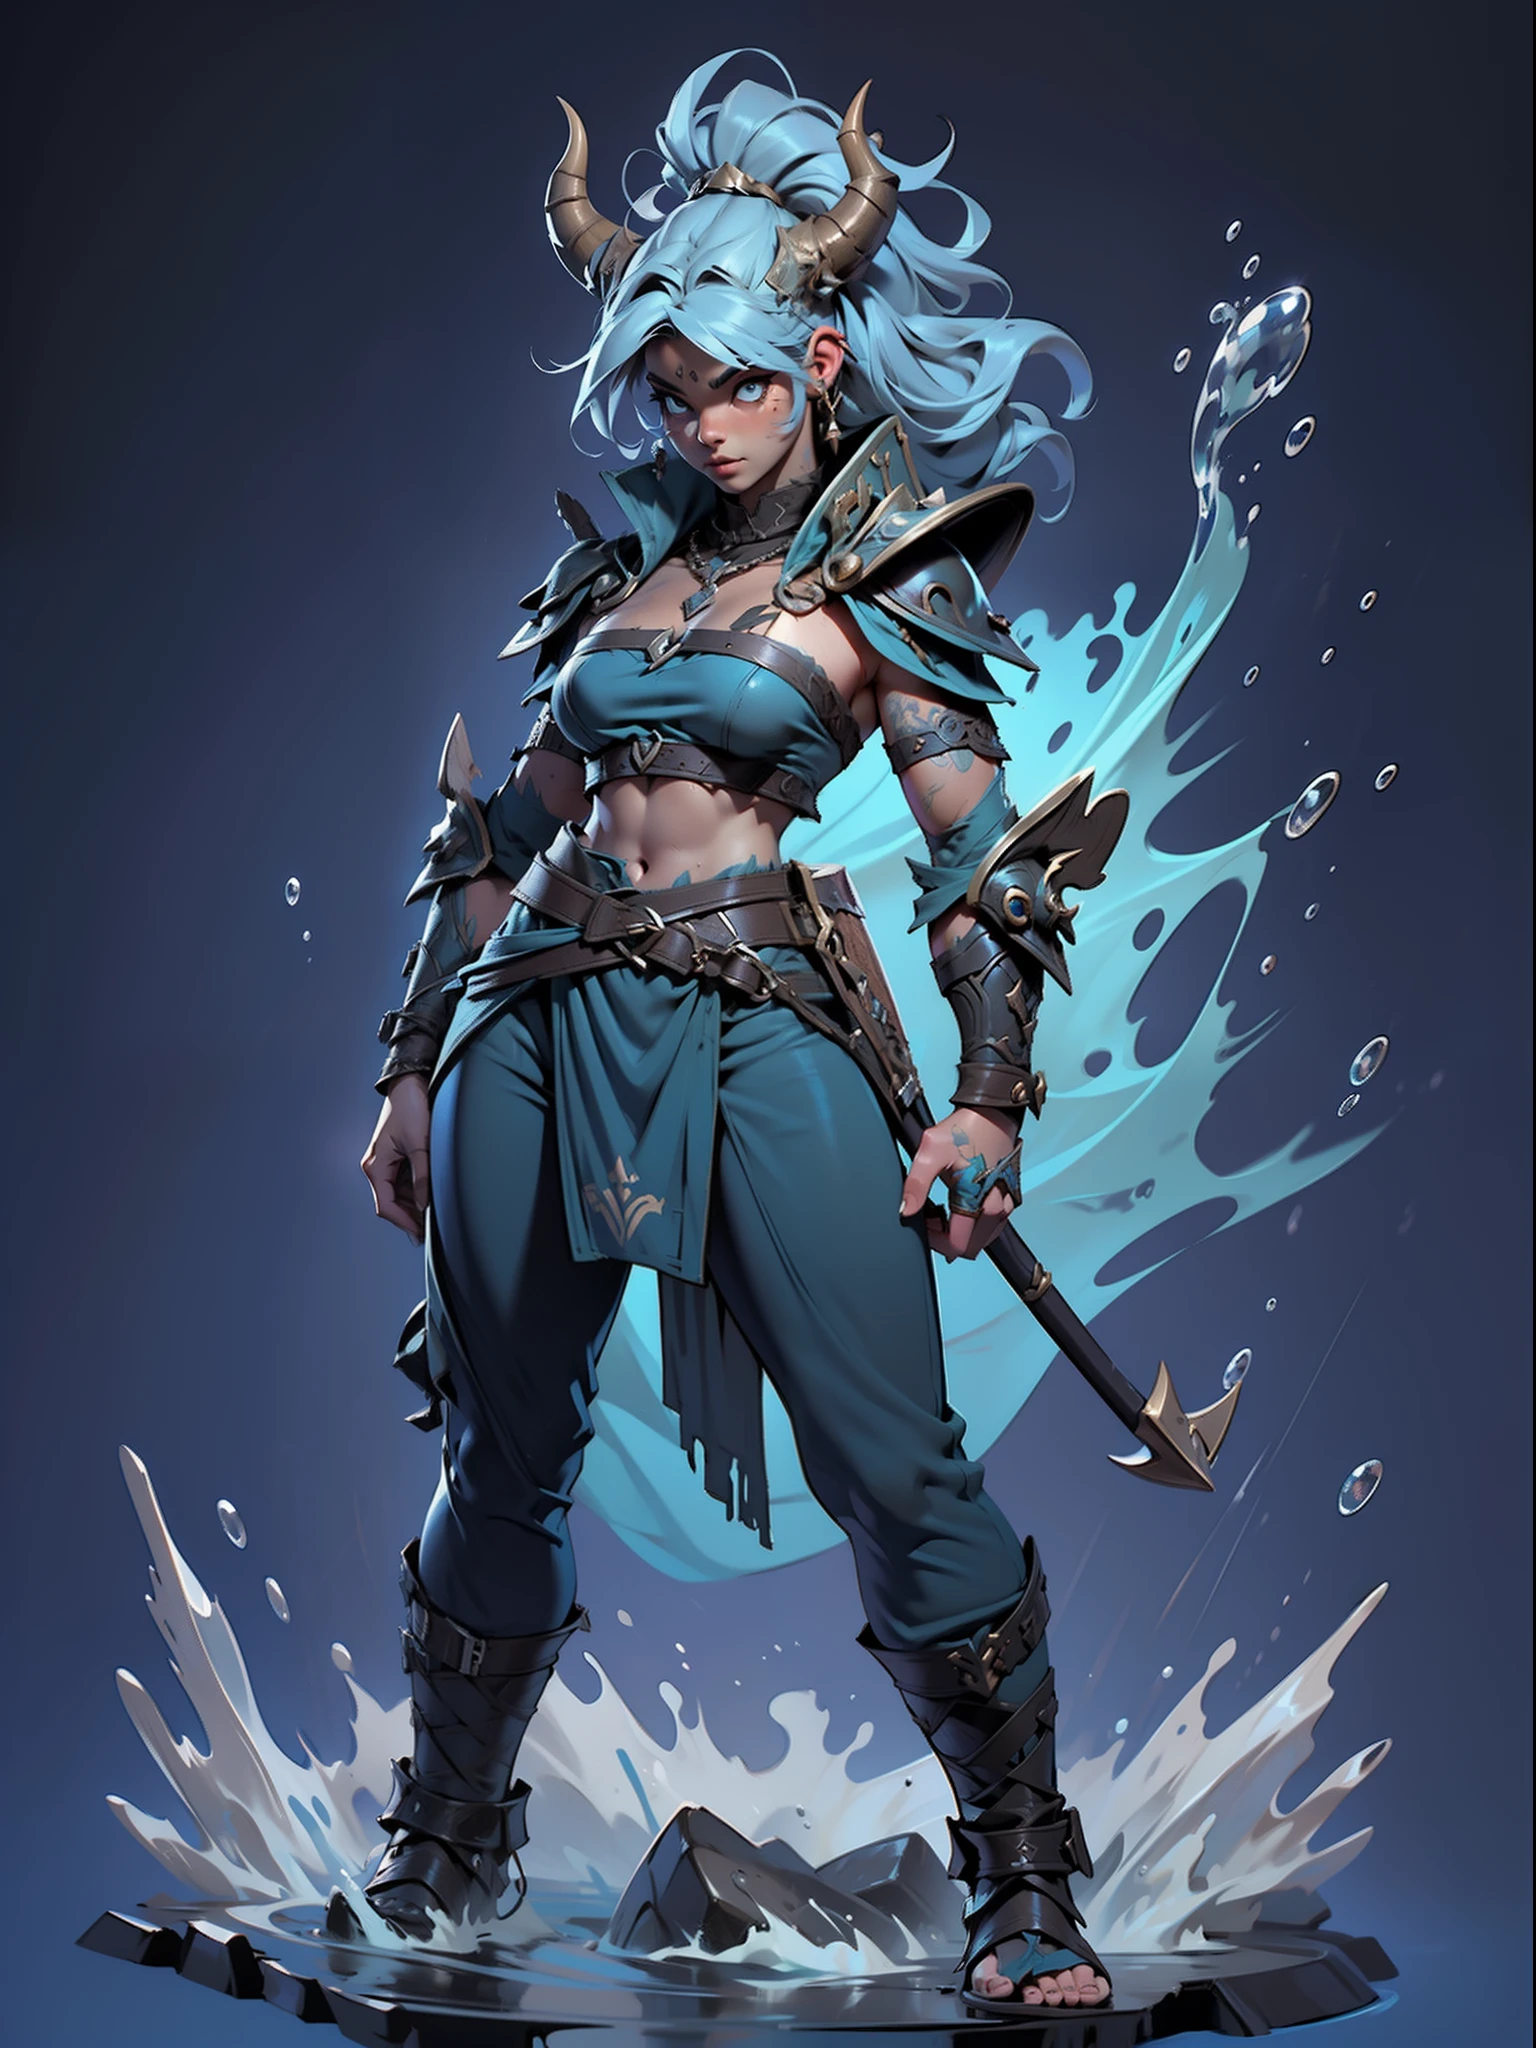 ((top-quality))、((tmasterpiece))、((Full body photo of a woman))、((very simple background))、(Game character design)、amazon warrior，Primitive barbarian tribal style，The water element blends with the clothes，((Blue cuirass bandeau))，exposed navels，Blue animal skin costume，cloaks，Blue clothes，Blue demon monster、monster design，(Water Goddesarine element merger)、Cartoony、Beastman、Ivory ornaments、solo、Fighting posture，Riot game concept art